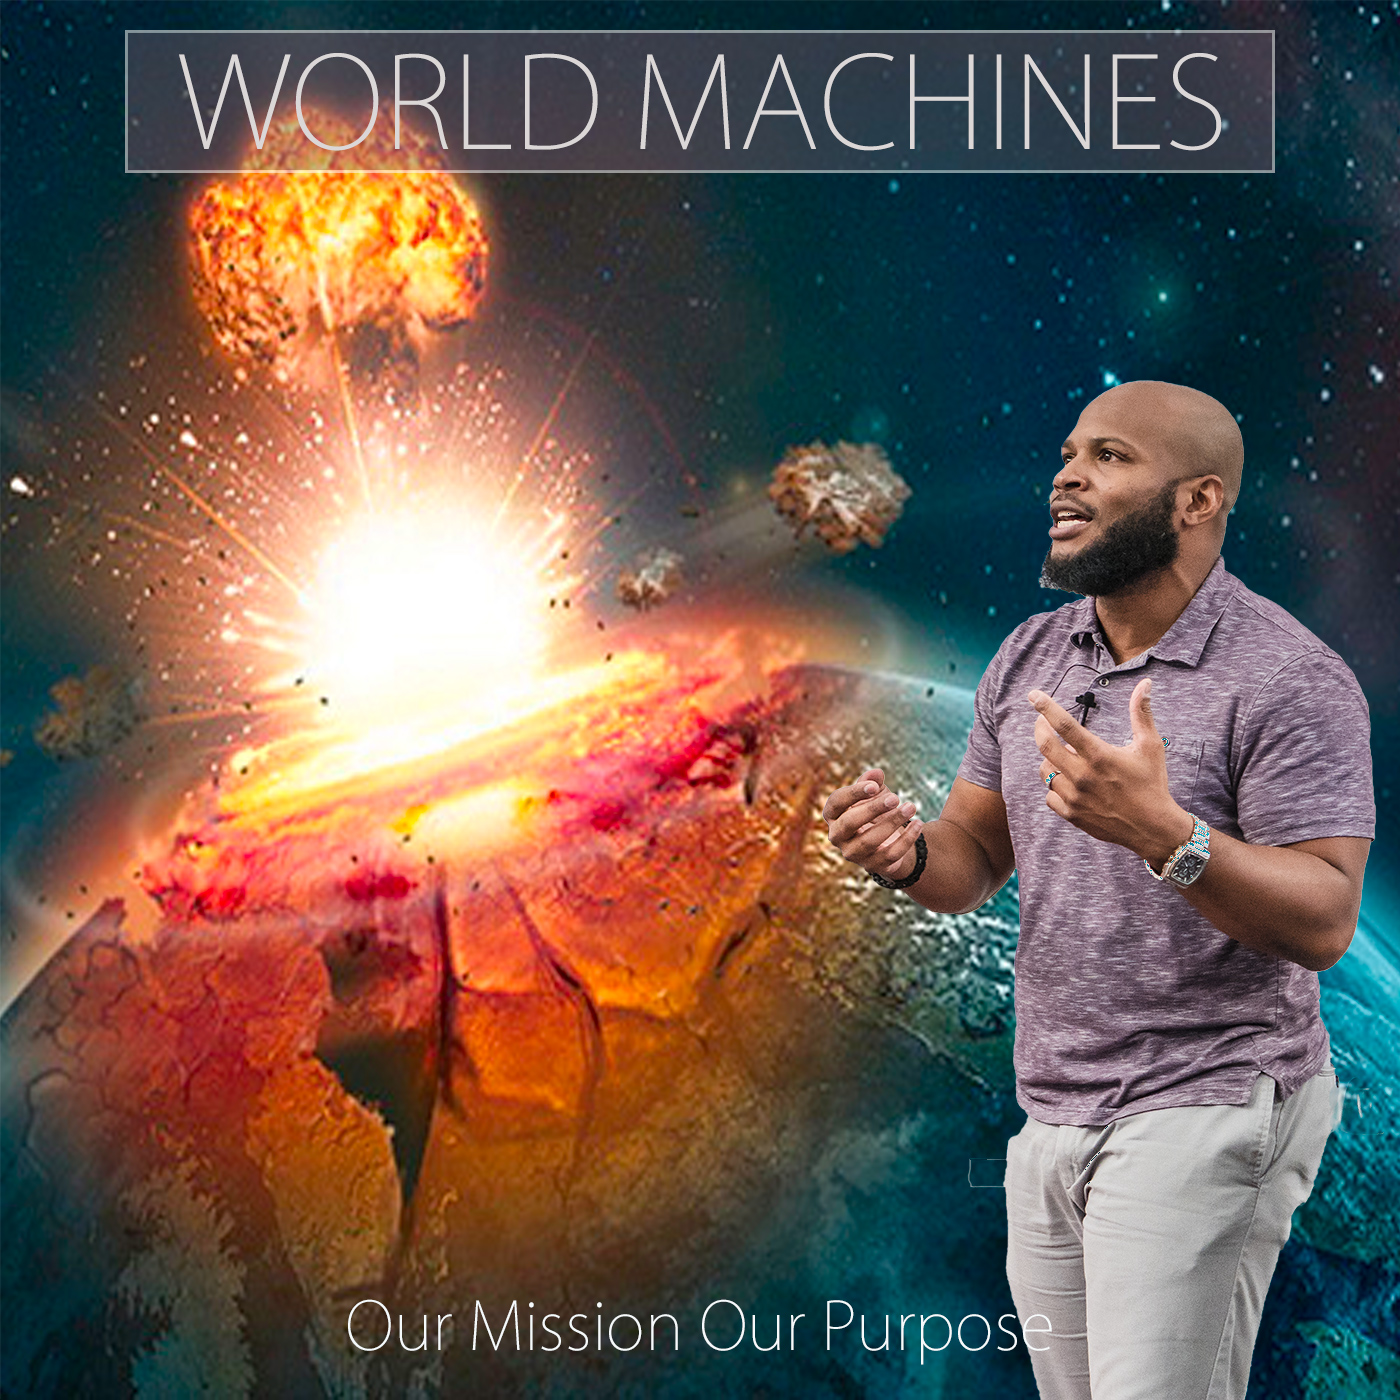 Our Mission Our Purpose (Paul the world machine)